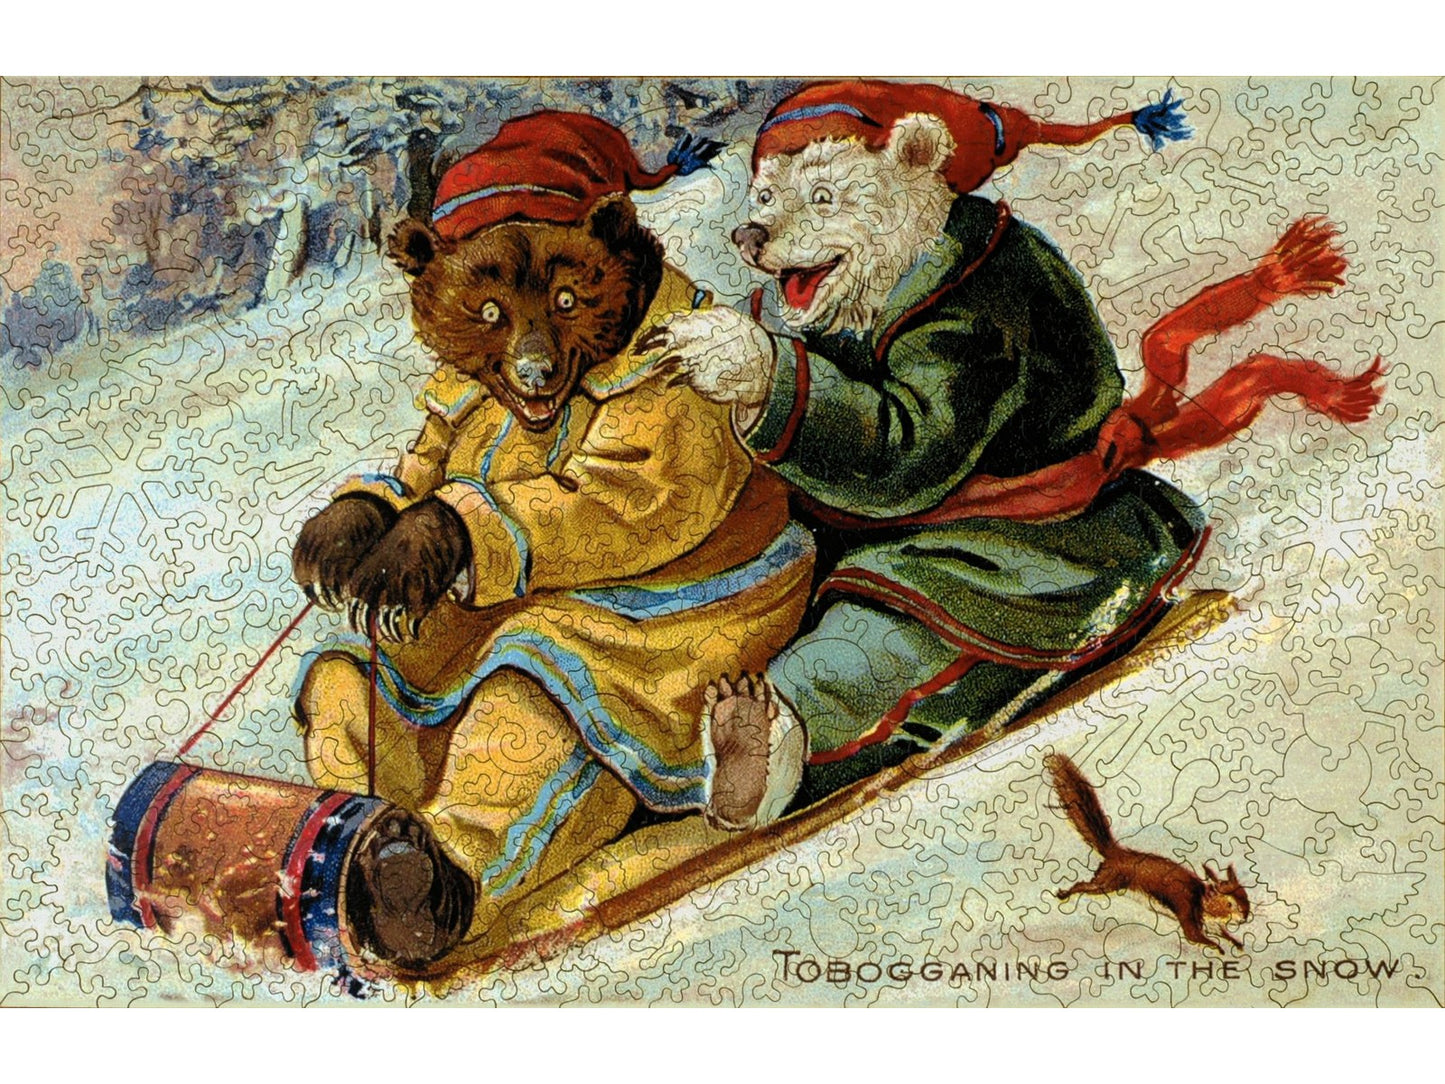 The front of the puzzle, Tobogganing in the Snow, showing two happy bears speeding down a hillside on a sled.